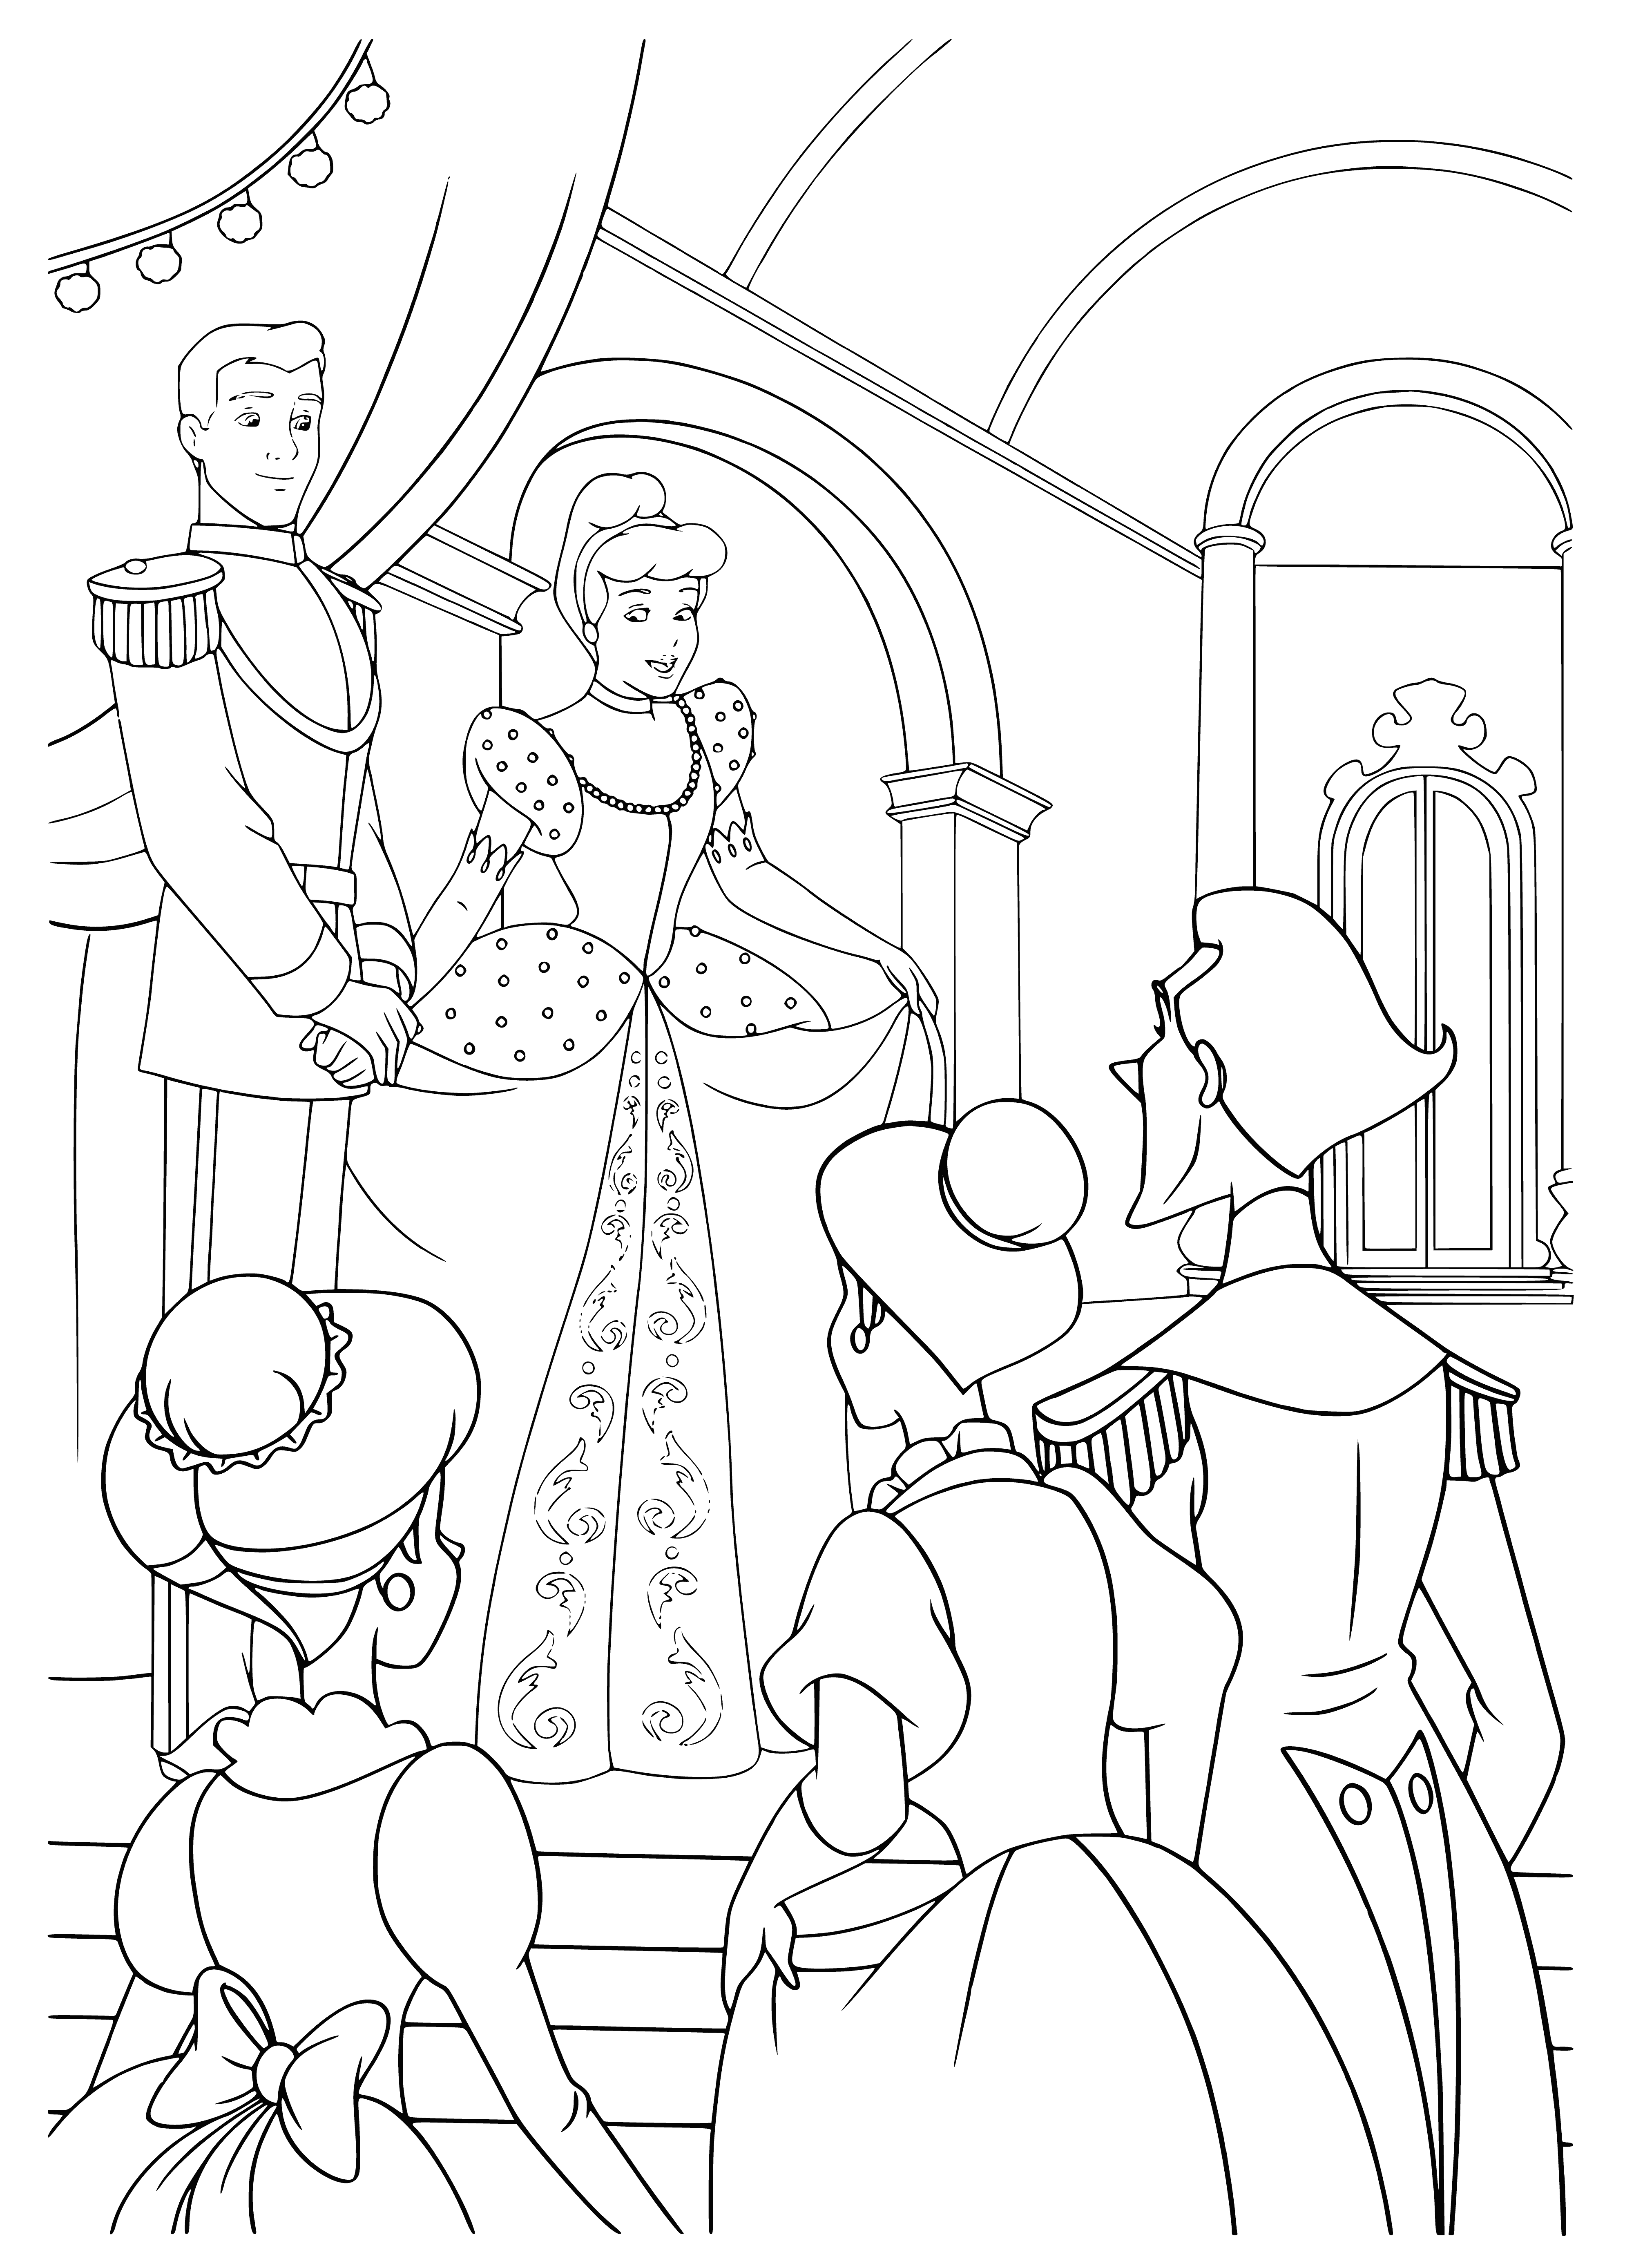 coloring page: Cinderella and the prince greet guests at their ornate door, surrounded by their happy friends. #happiness